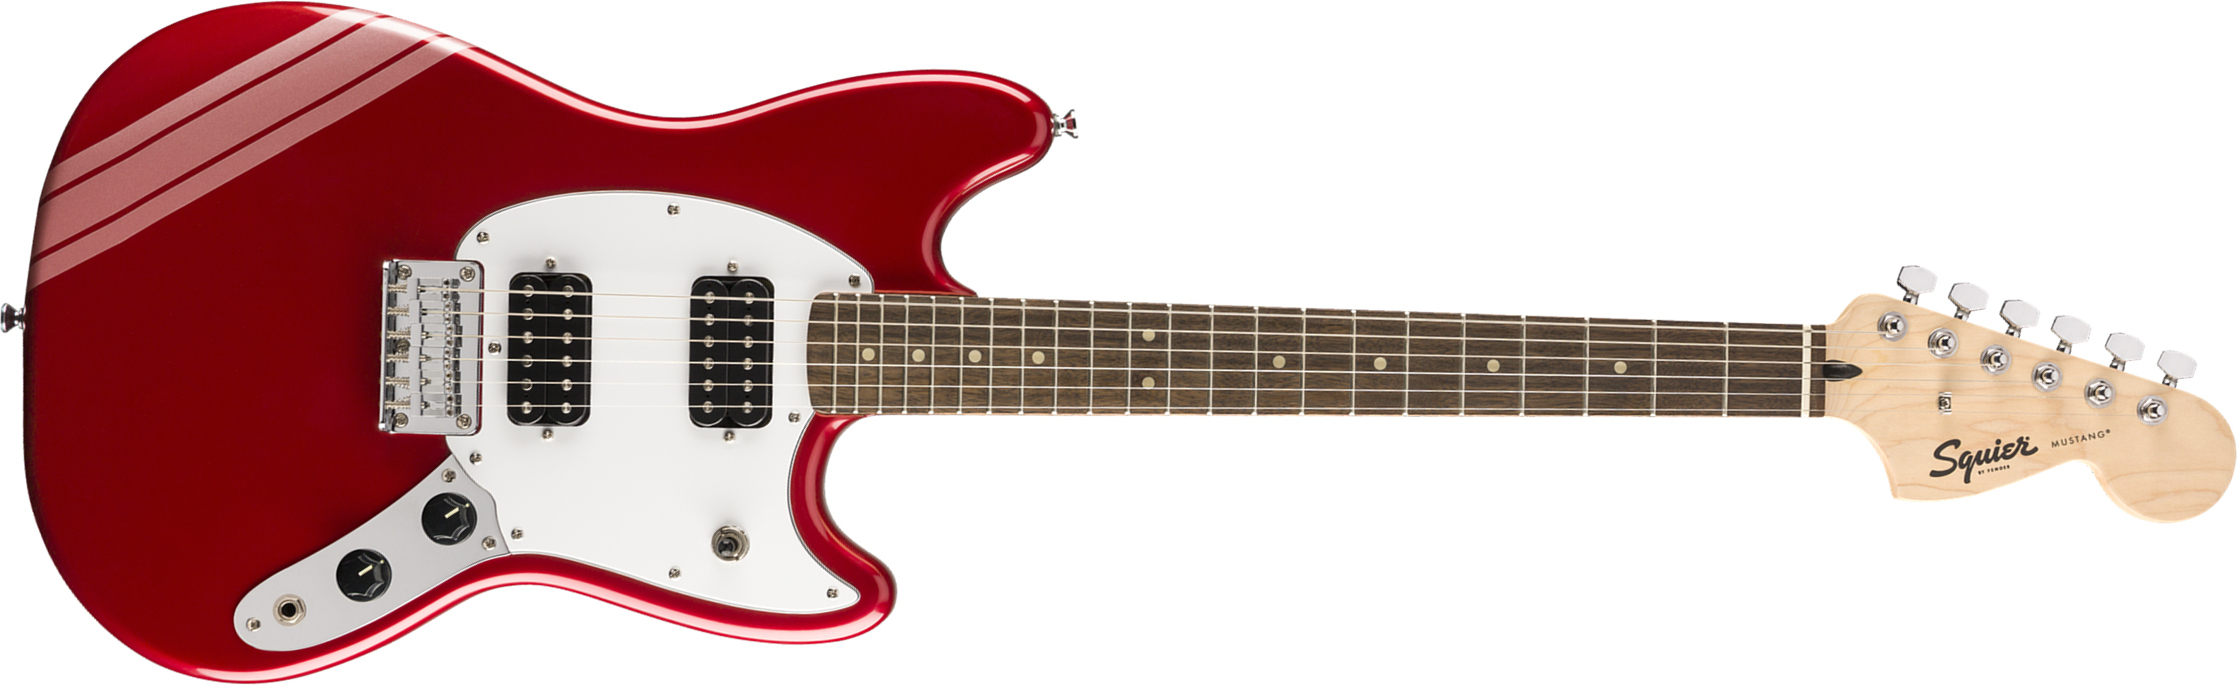 Squier Mustang Bullet Competition Hh Fsr Ht Lau - Candy Apple Red - Retro-Rock-E-Gitarre - Main picture